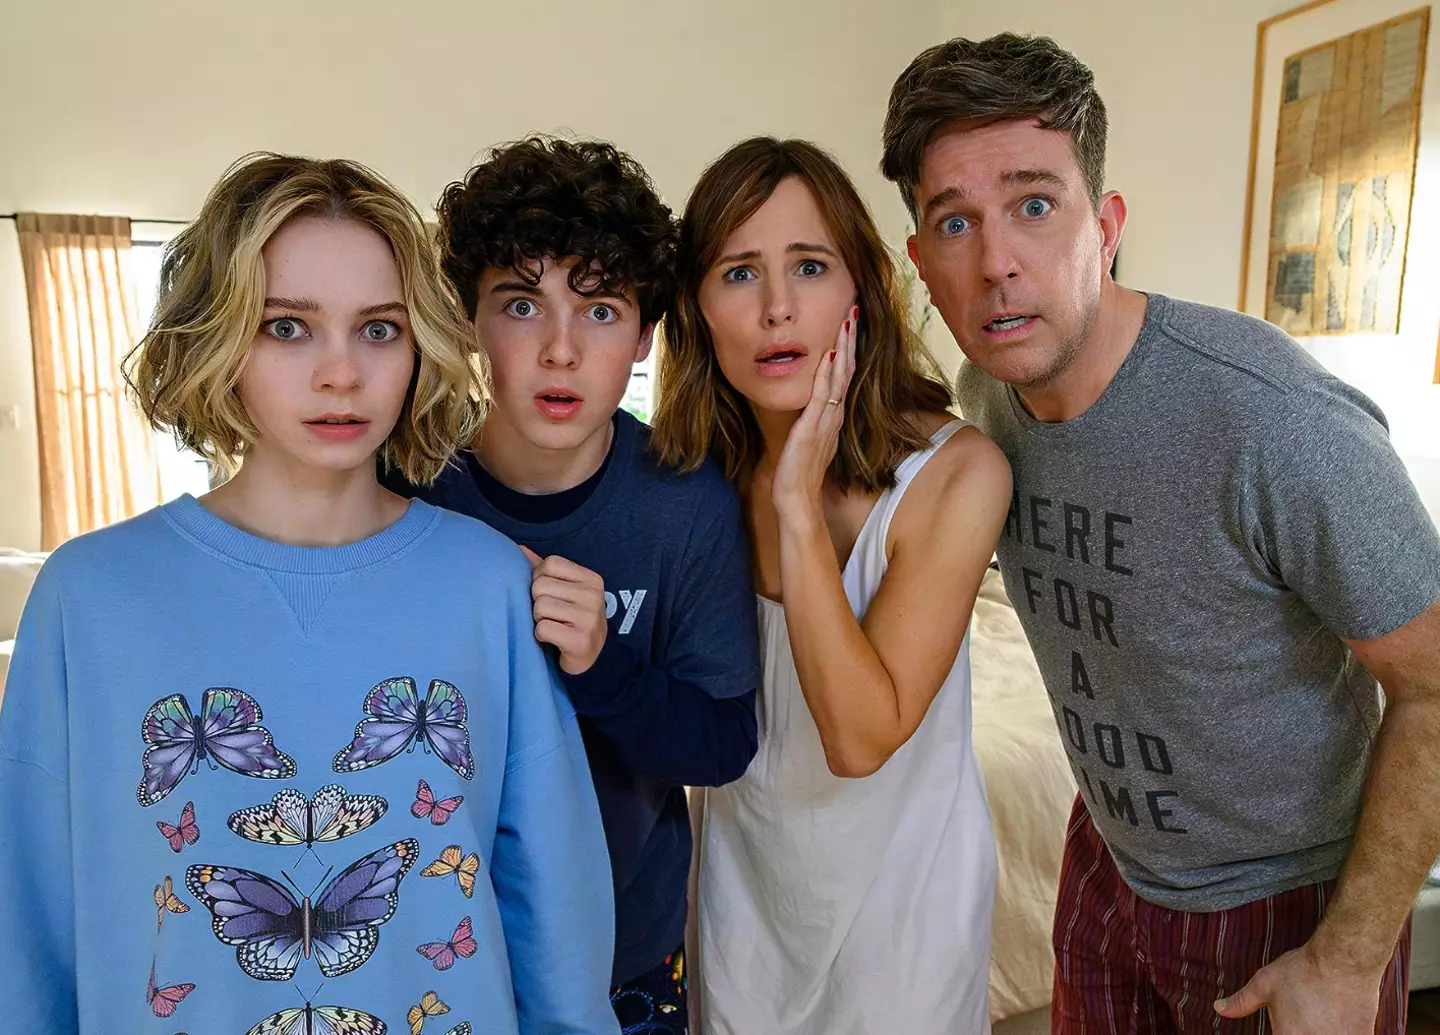 Netflix’s Family Switch is continuing to divide viewers and critics about just how good it is.